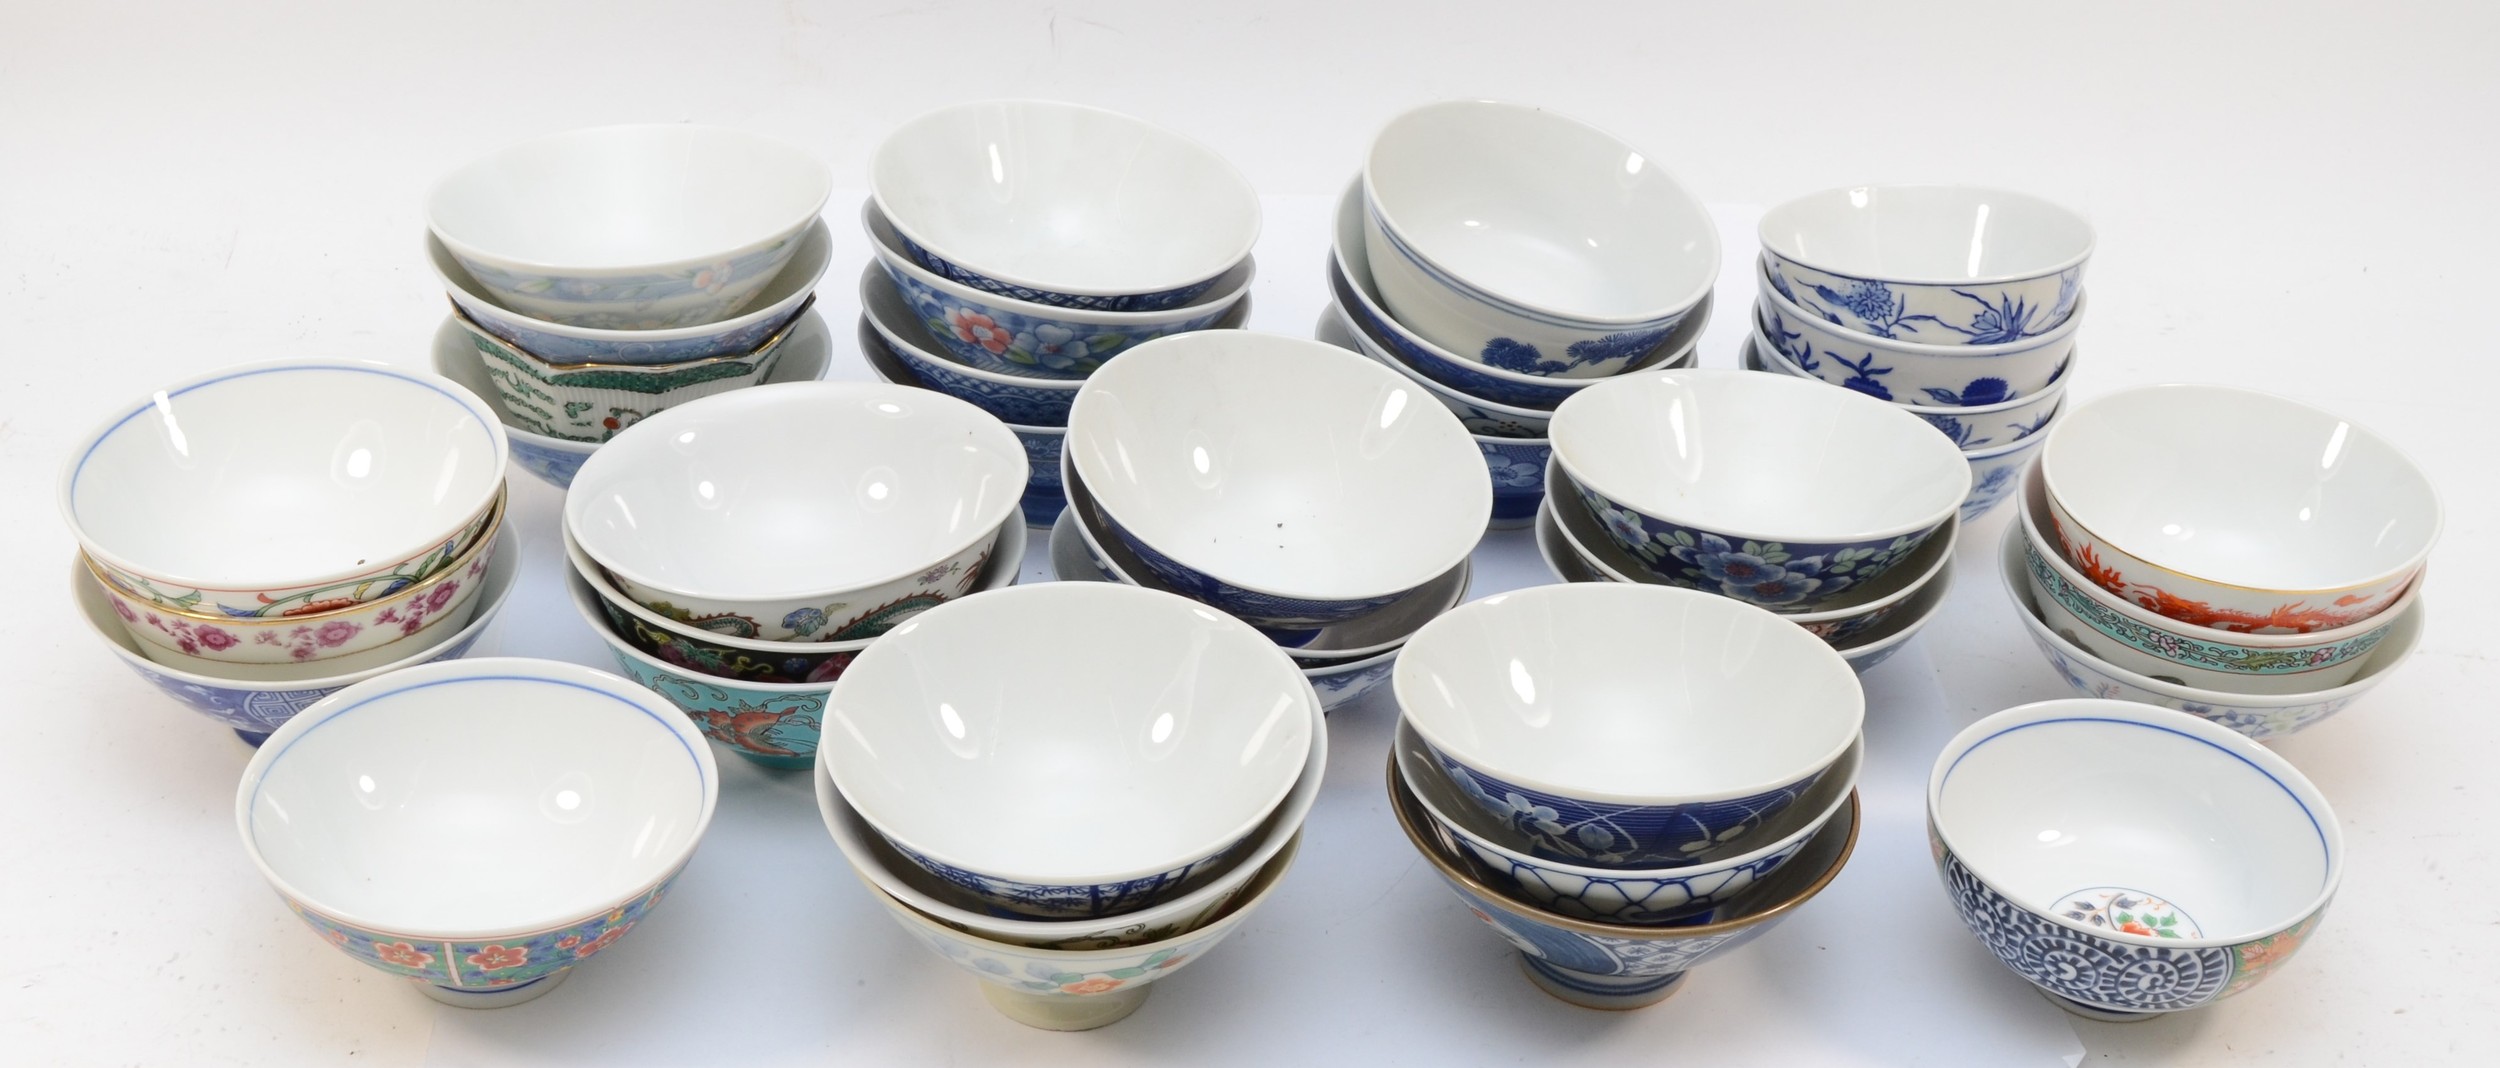 A collection of 20th century Chinese tea bowls. - Image 2 of 6